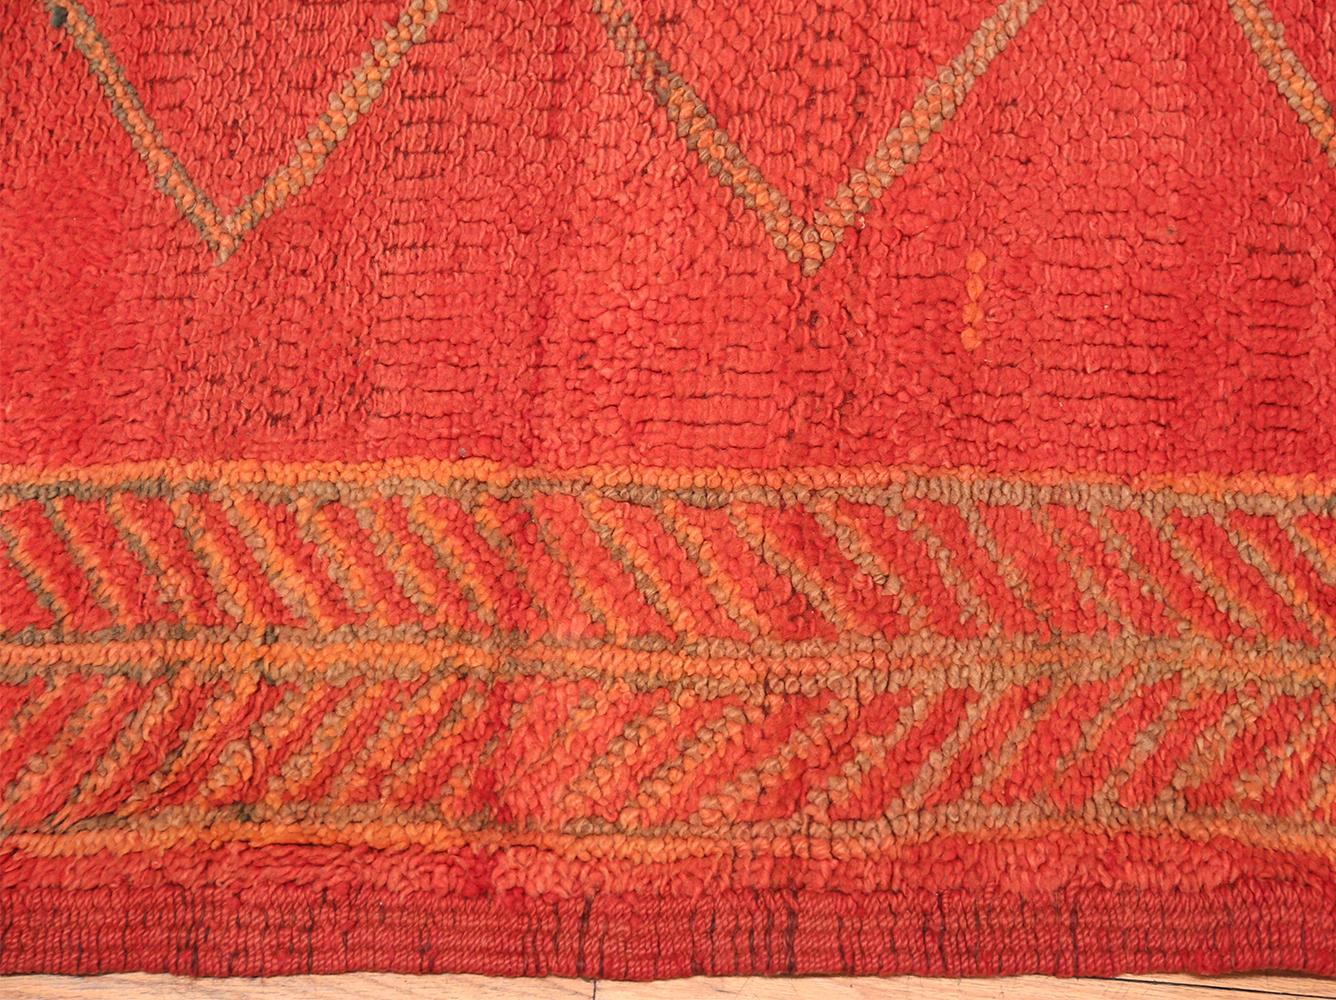 Beautiful vintage Moroccan red rug, country of origin: Morocco, date circa mid-20th century. Size: 5 ft. 6 in x 11 ft. 8 in (1.68 m x 3.56 m).